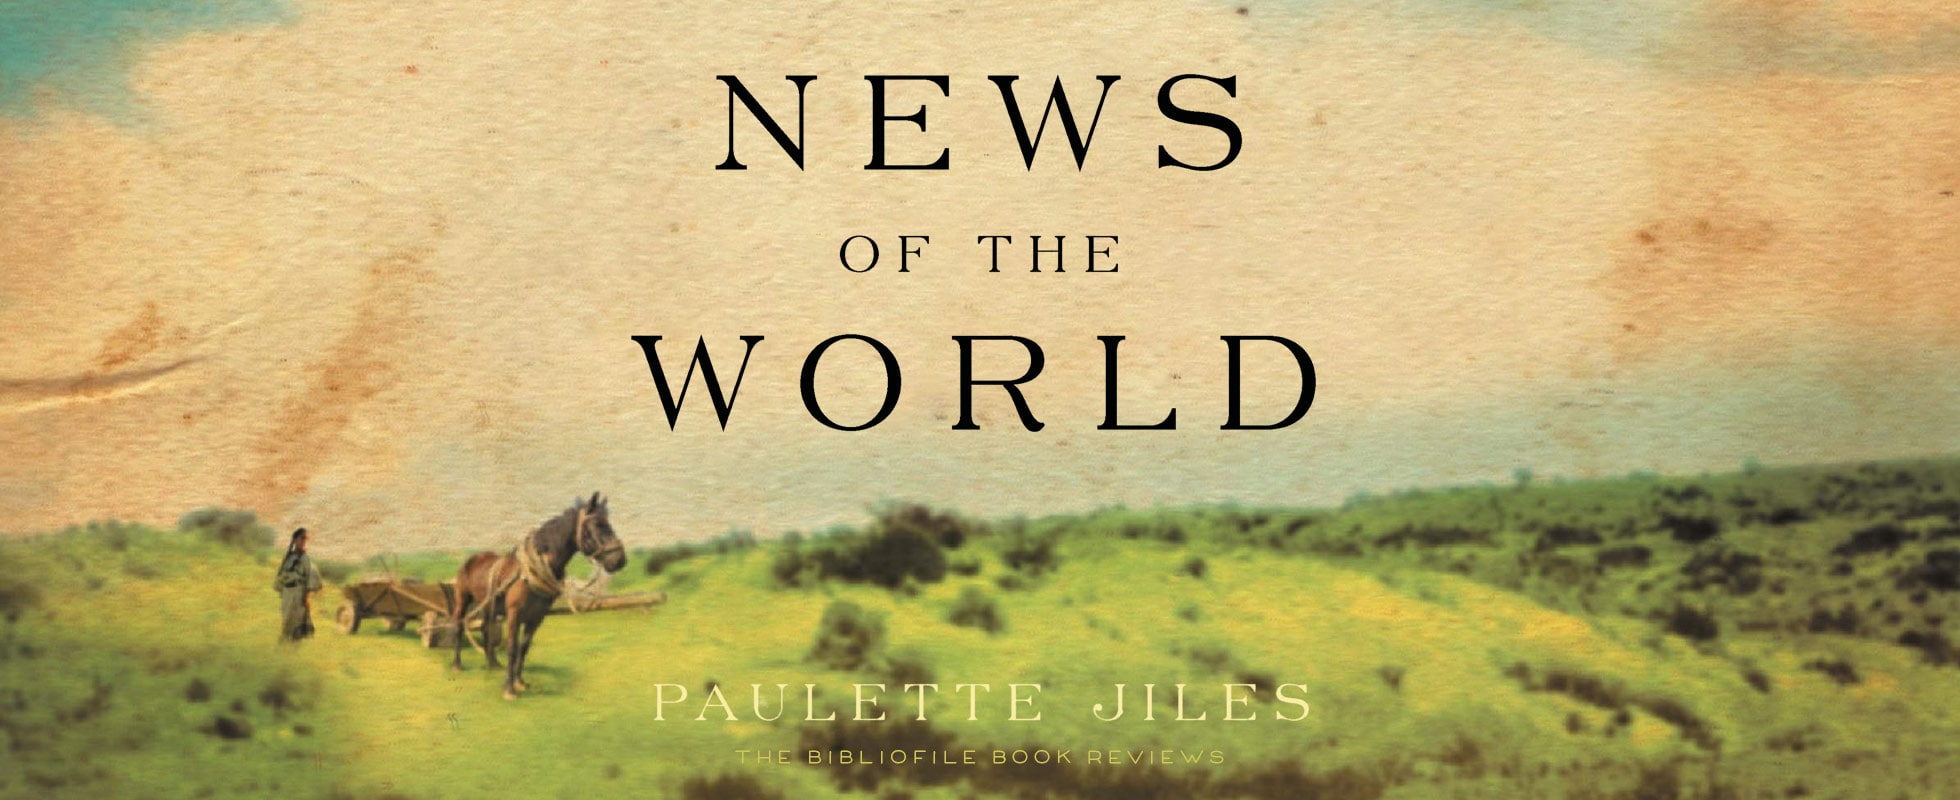 news of the world by paulette jiles Book Summary, Chapter-by-Chapter Summary, Detailed Plot Synopsis, Book Review